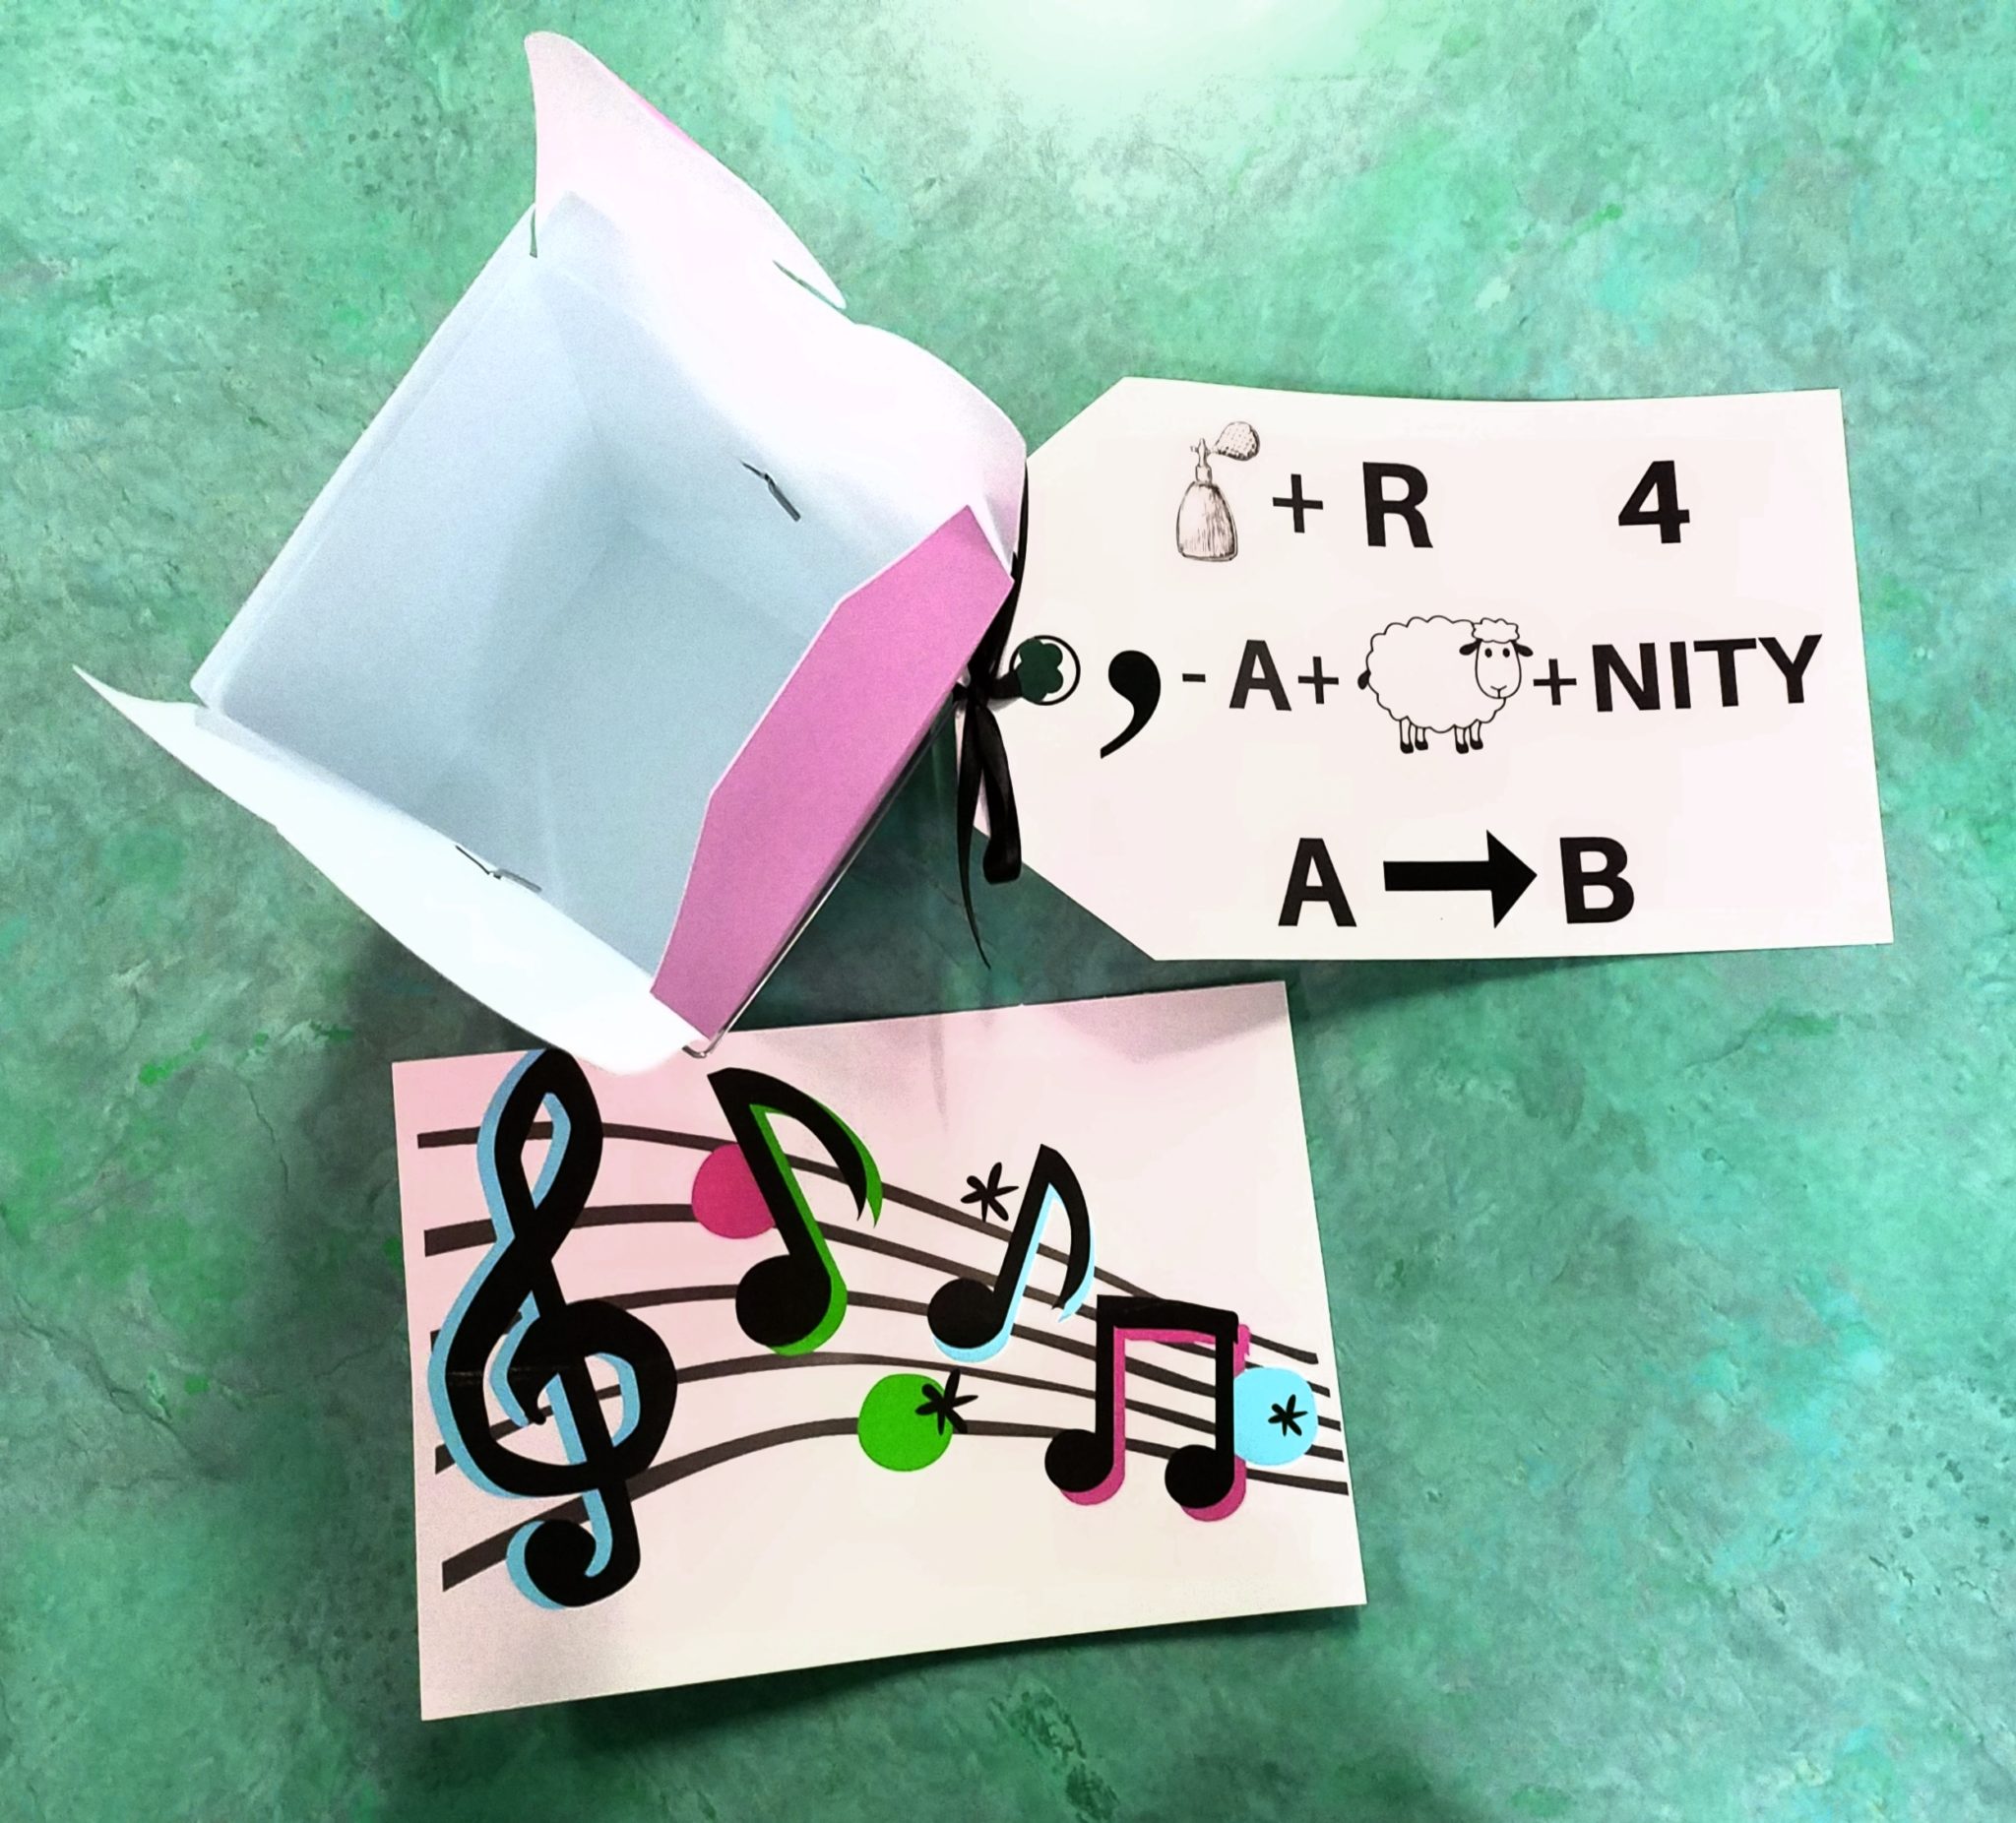 Special puzzle boxes revealed what type of performance each nonprofit would be honored with. CCT WILL GET A MUSICAL PIECE!